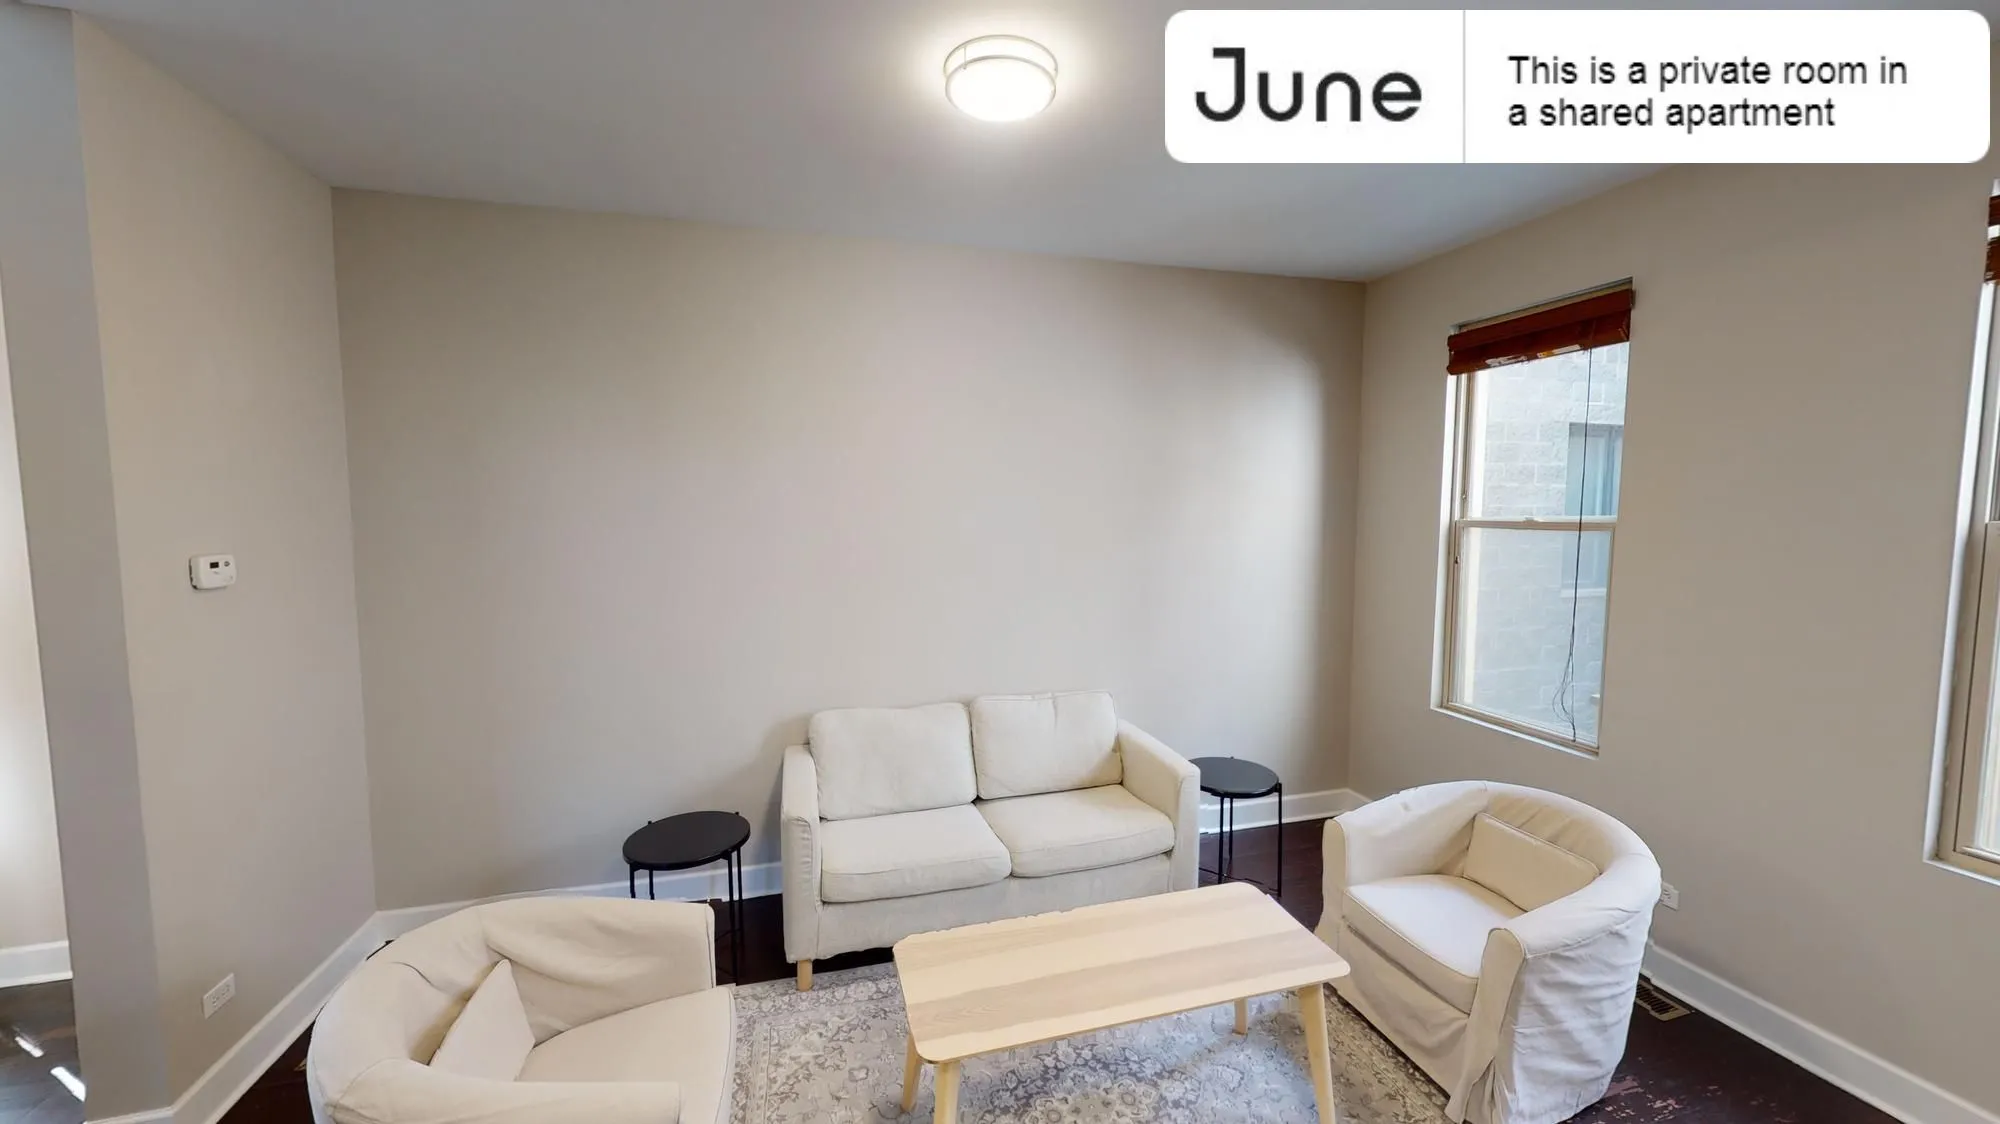 1847 W ARMITAGE AVE 60622-Room For Rent-unit#03-r-Chicago-IL